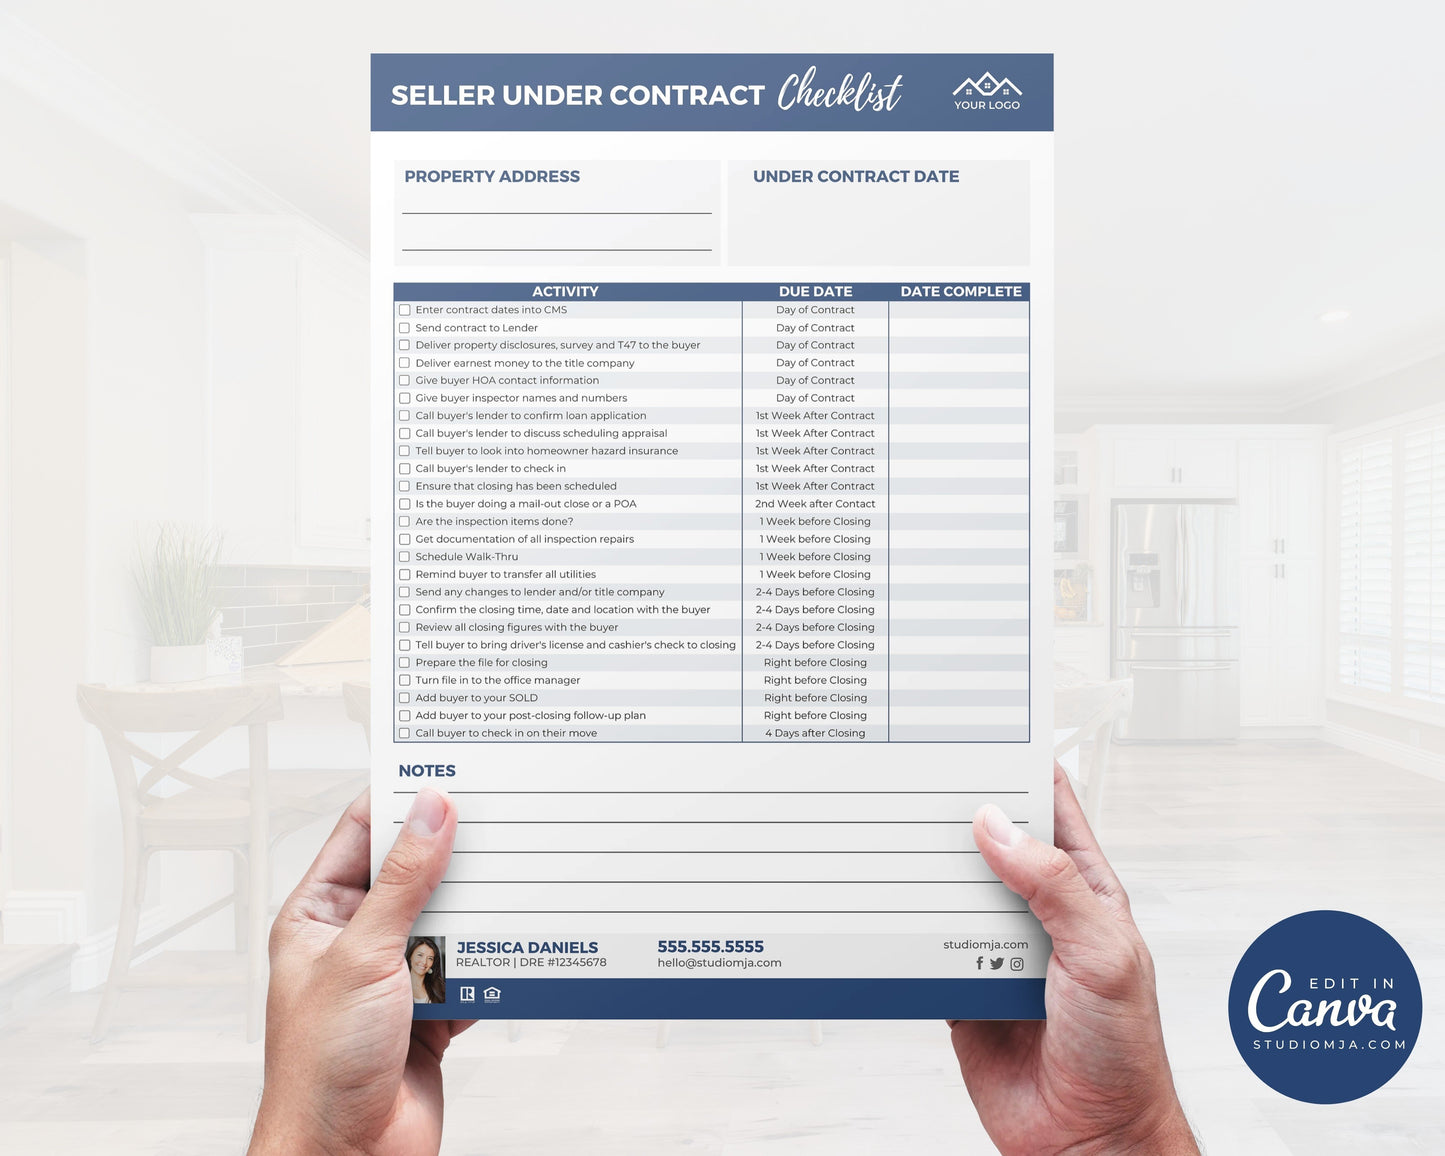 Seller Under Contract Checklist Template